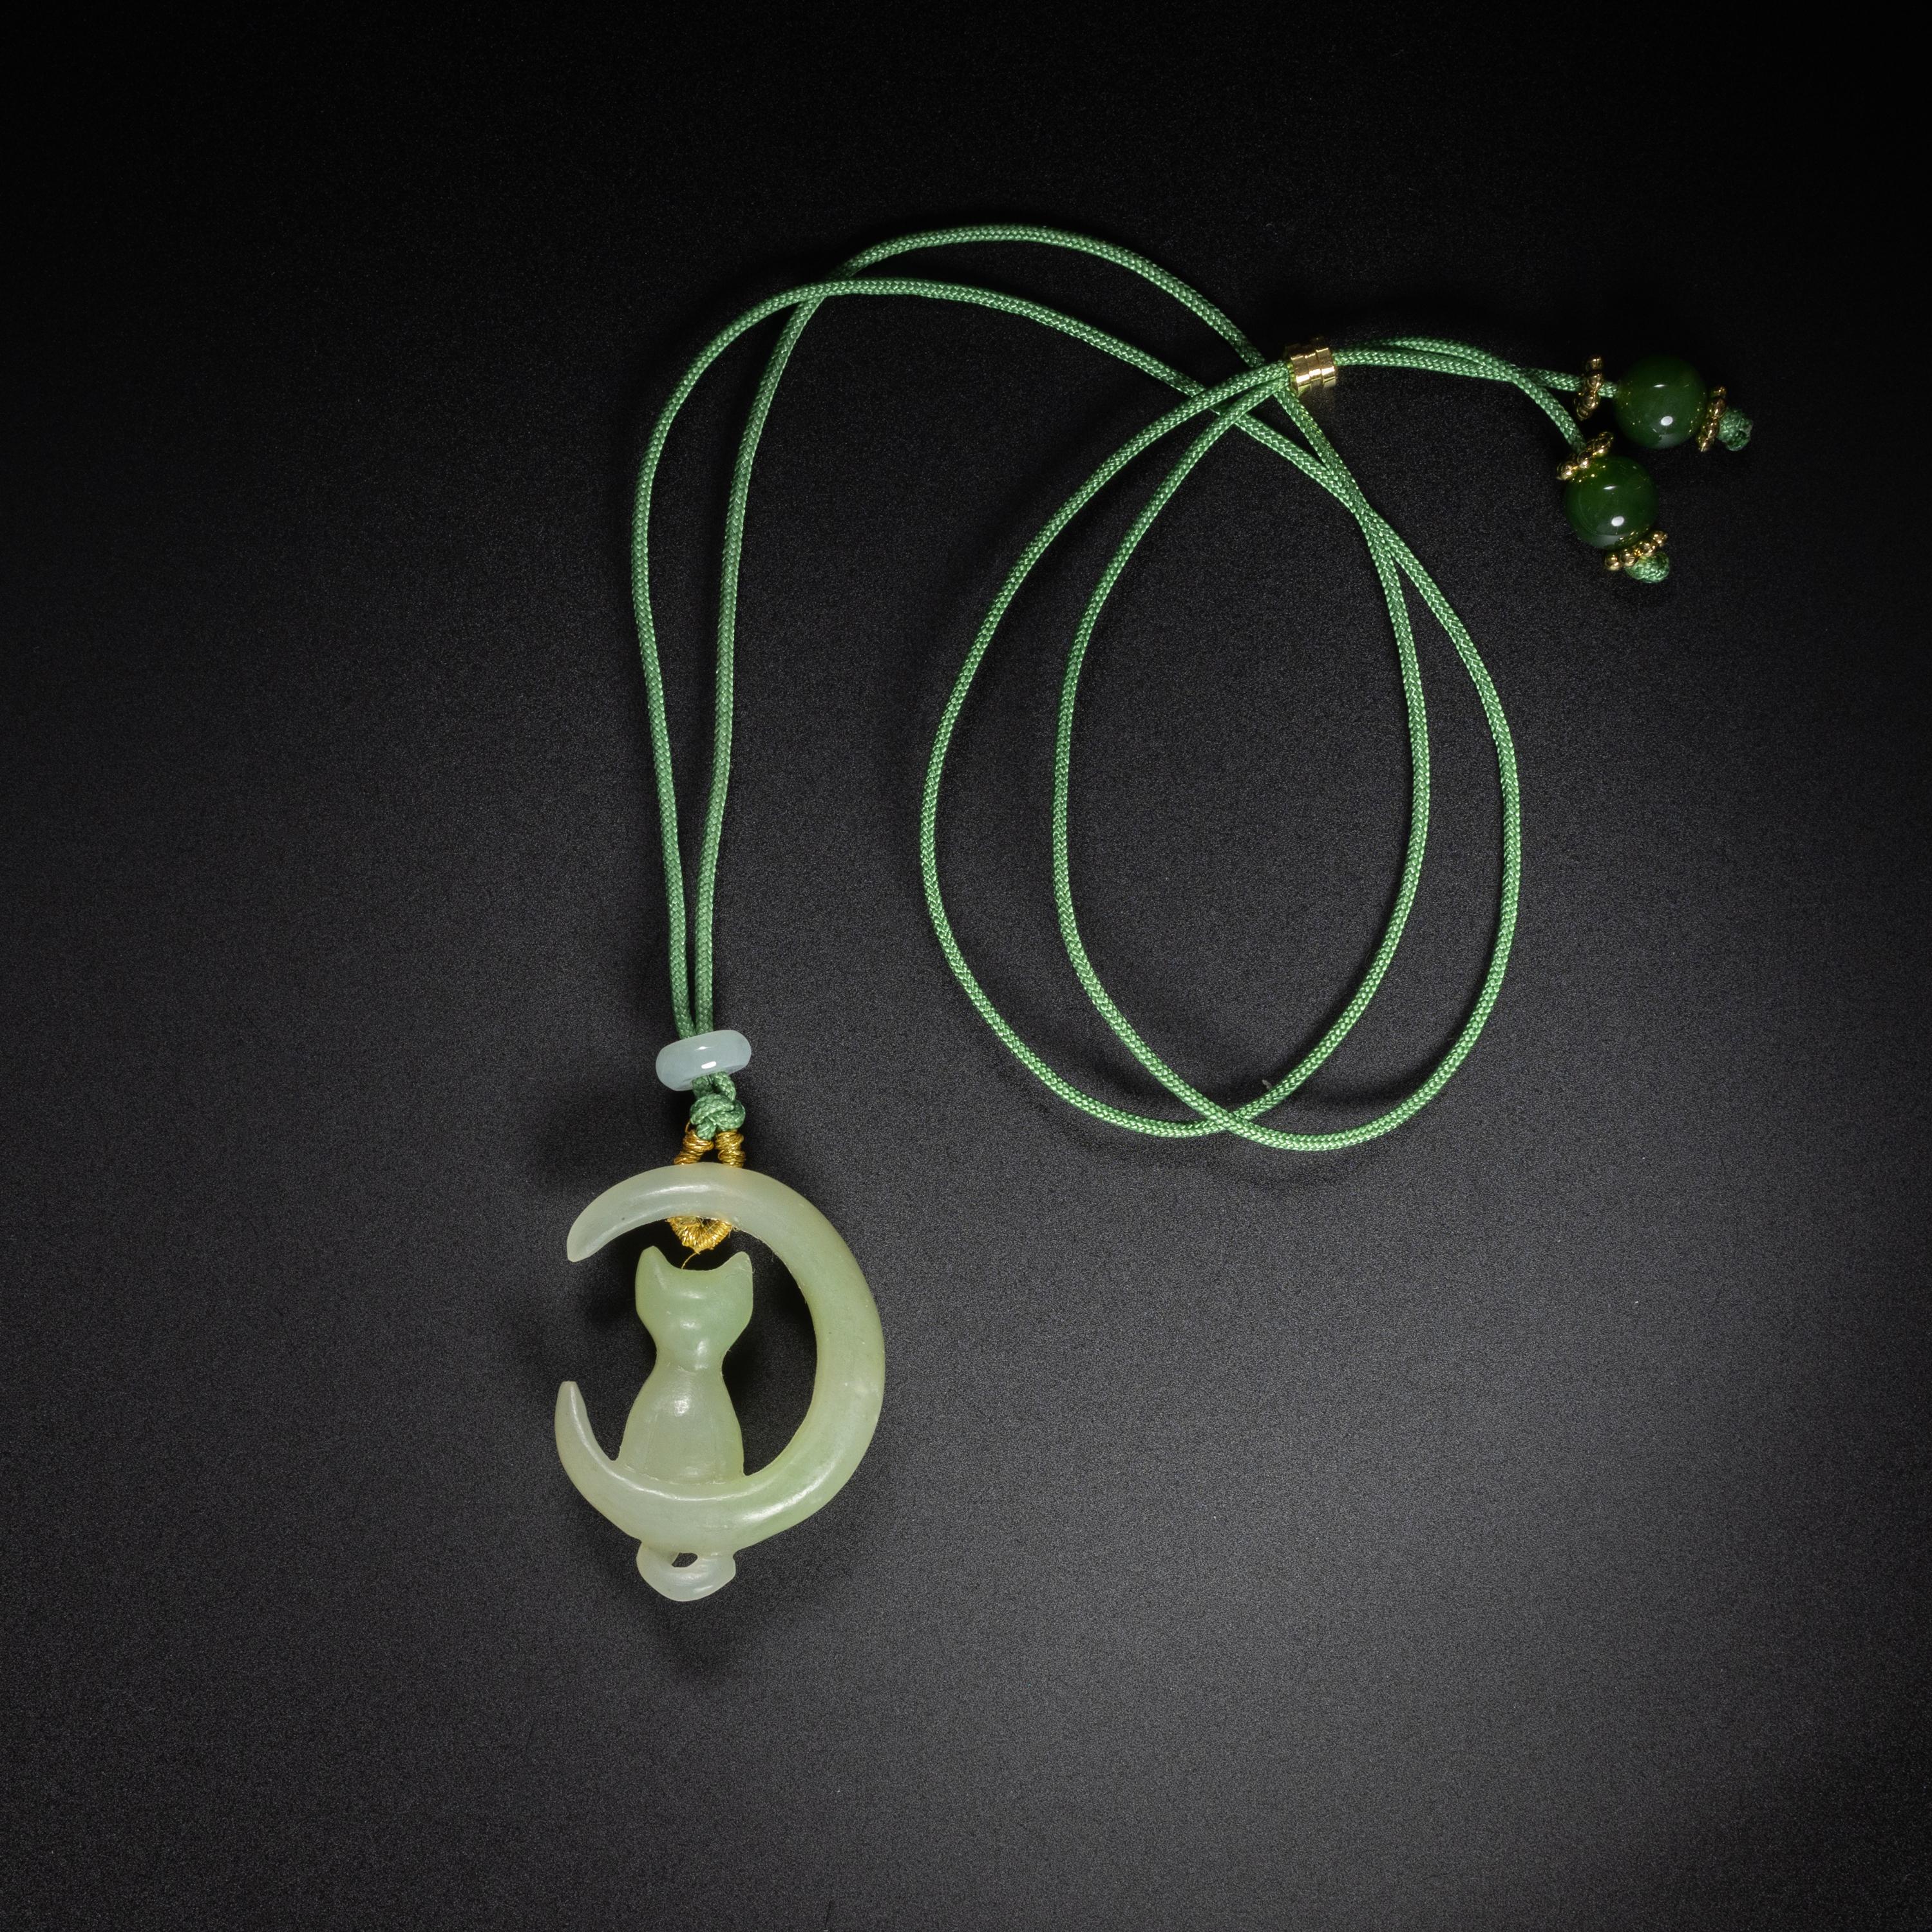 Hand-carved from natural, untreated nephrite jade, this charming cat is perched within a crescent moon. The carving is sensitive and expressive; the pendant one-of-a-kind. A sturdy black nylon cord transforms the carving into a necklace. Ships with